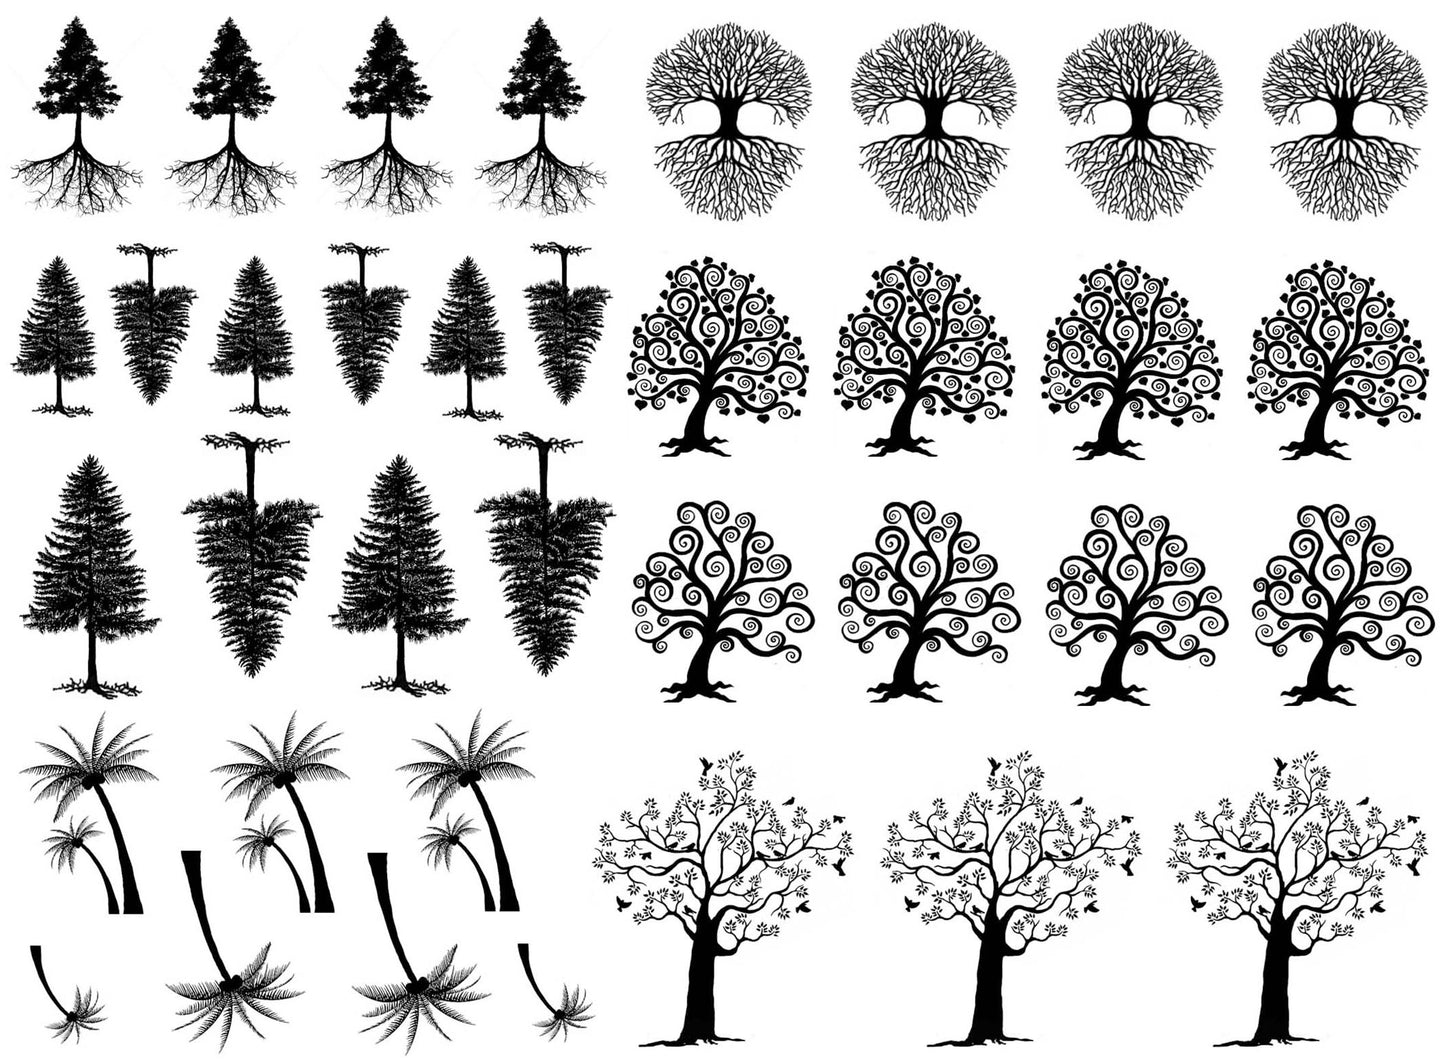 Tree Curly Q 36 pcs 1/2" to 1-1/4" Black Fused Glass Decals